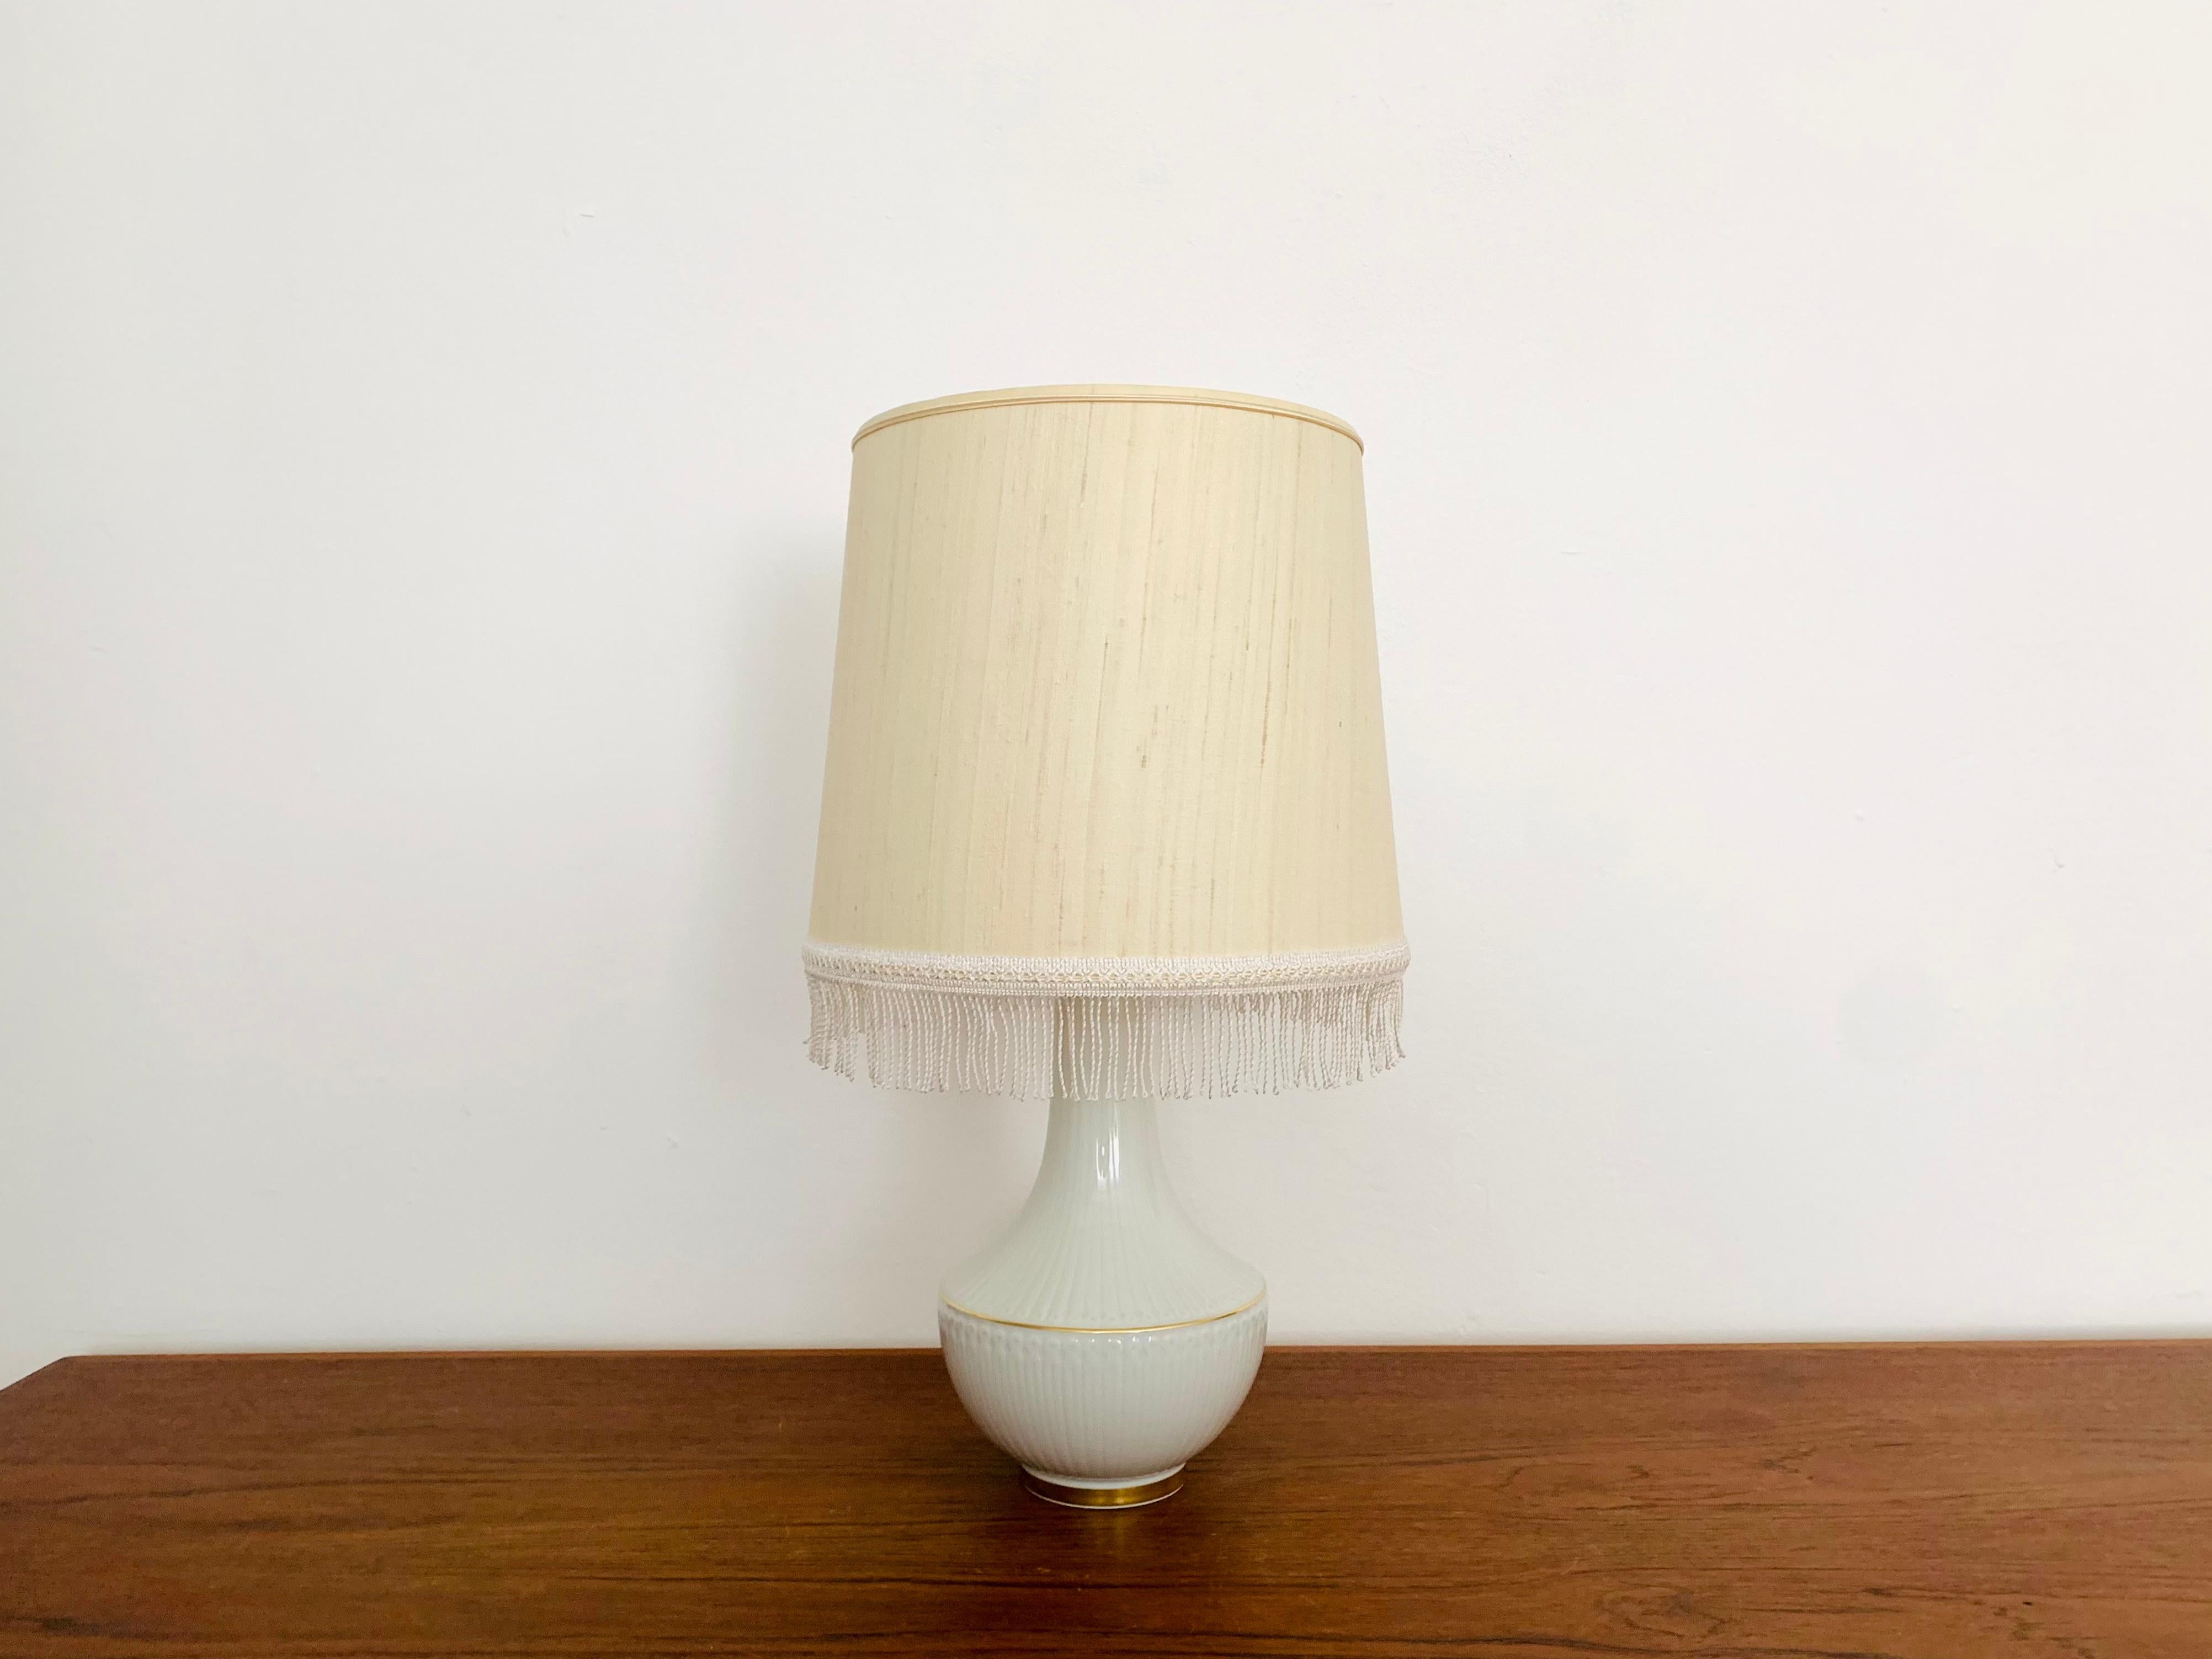 Impressive porcelain table lamp from the 1960s.
Extremely high-quality workmanship and very beautiful design.

Manufacturer: Hutschenreuther

Condition:

Very good vintage condition with minimal signs of wear.
The lampshade has slight signs of